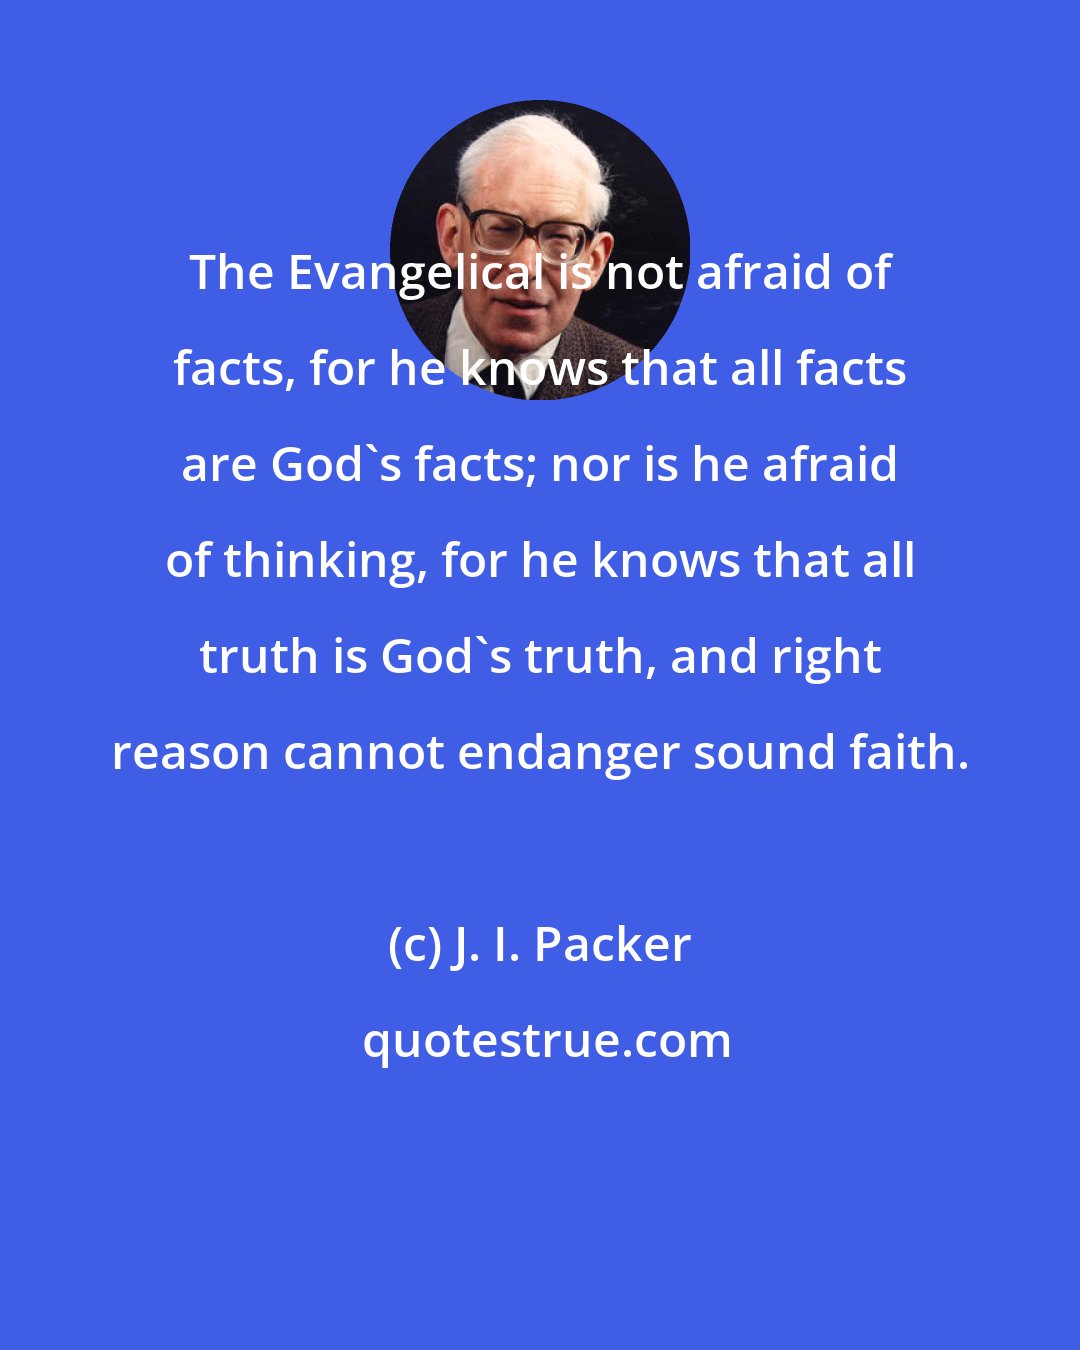 J. I. Packer: The Evangelical is not afraid of facts, for he knows that all facts are God's facts; nor is he afraid of thinking, for he knows that all truth is God's truth, and right reason cannot endanger sound faith.